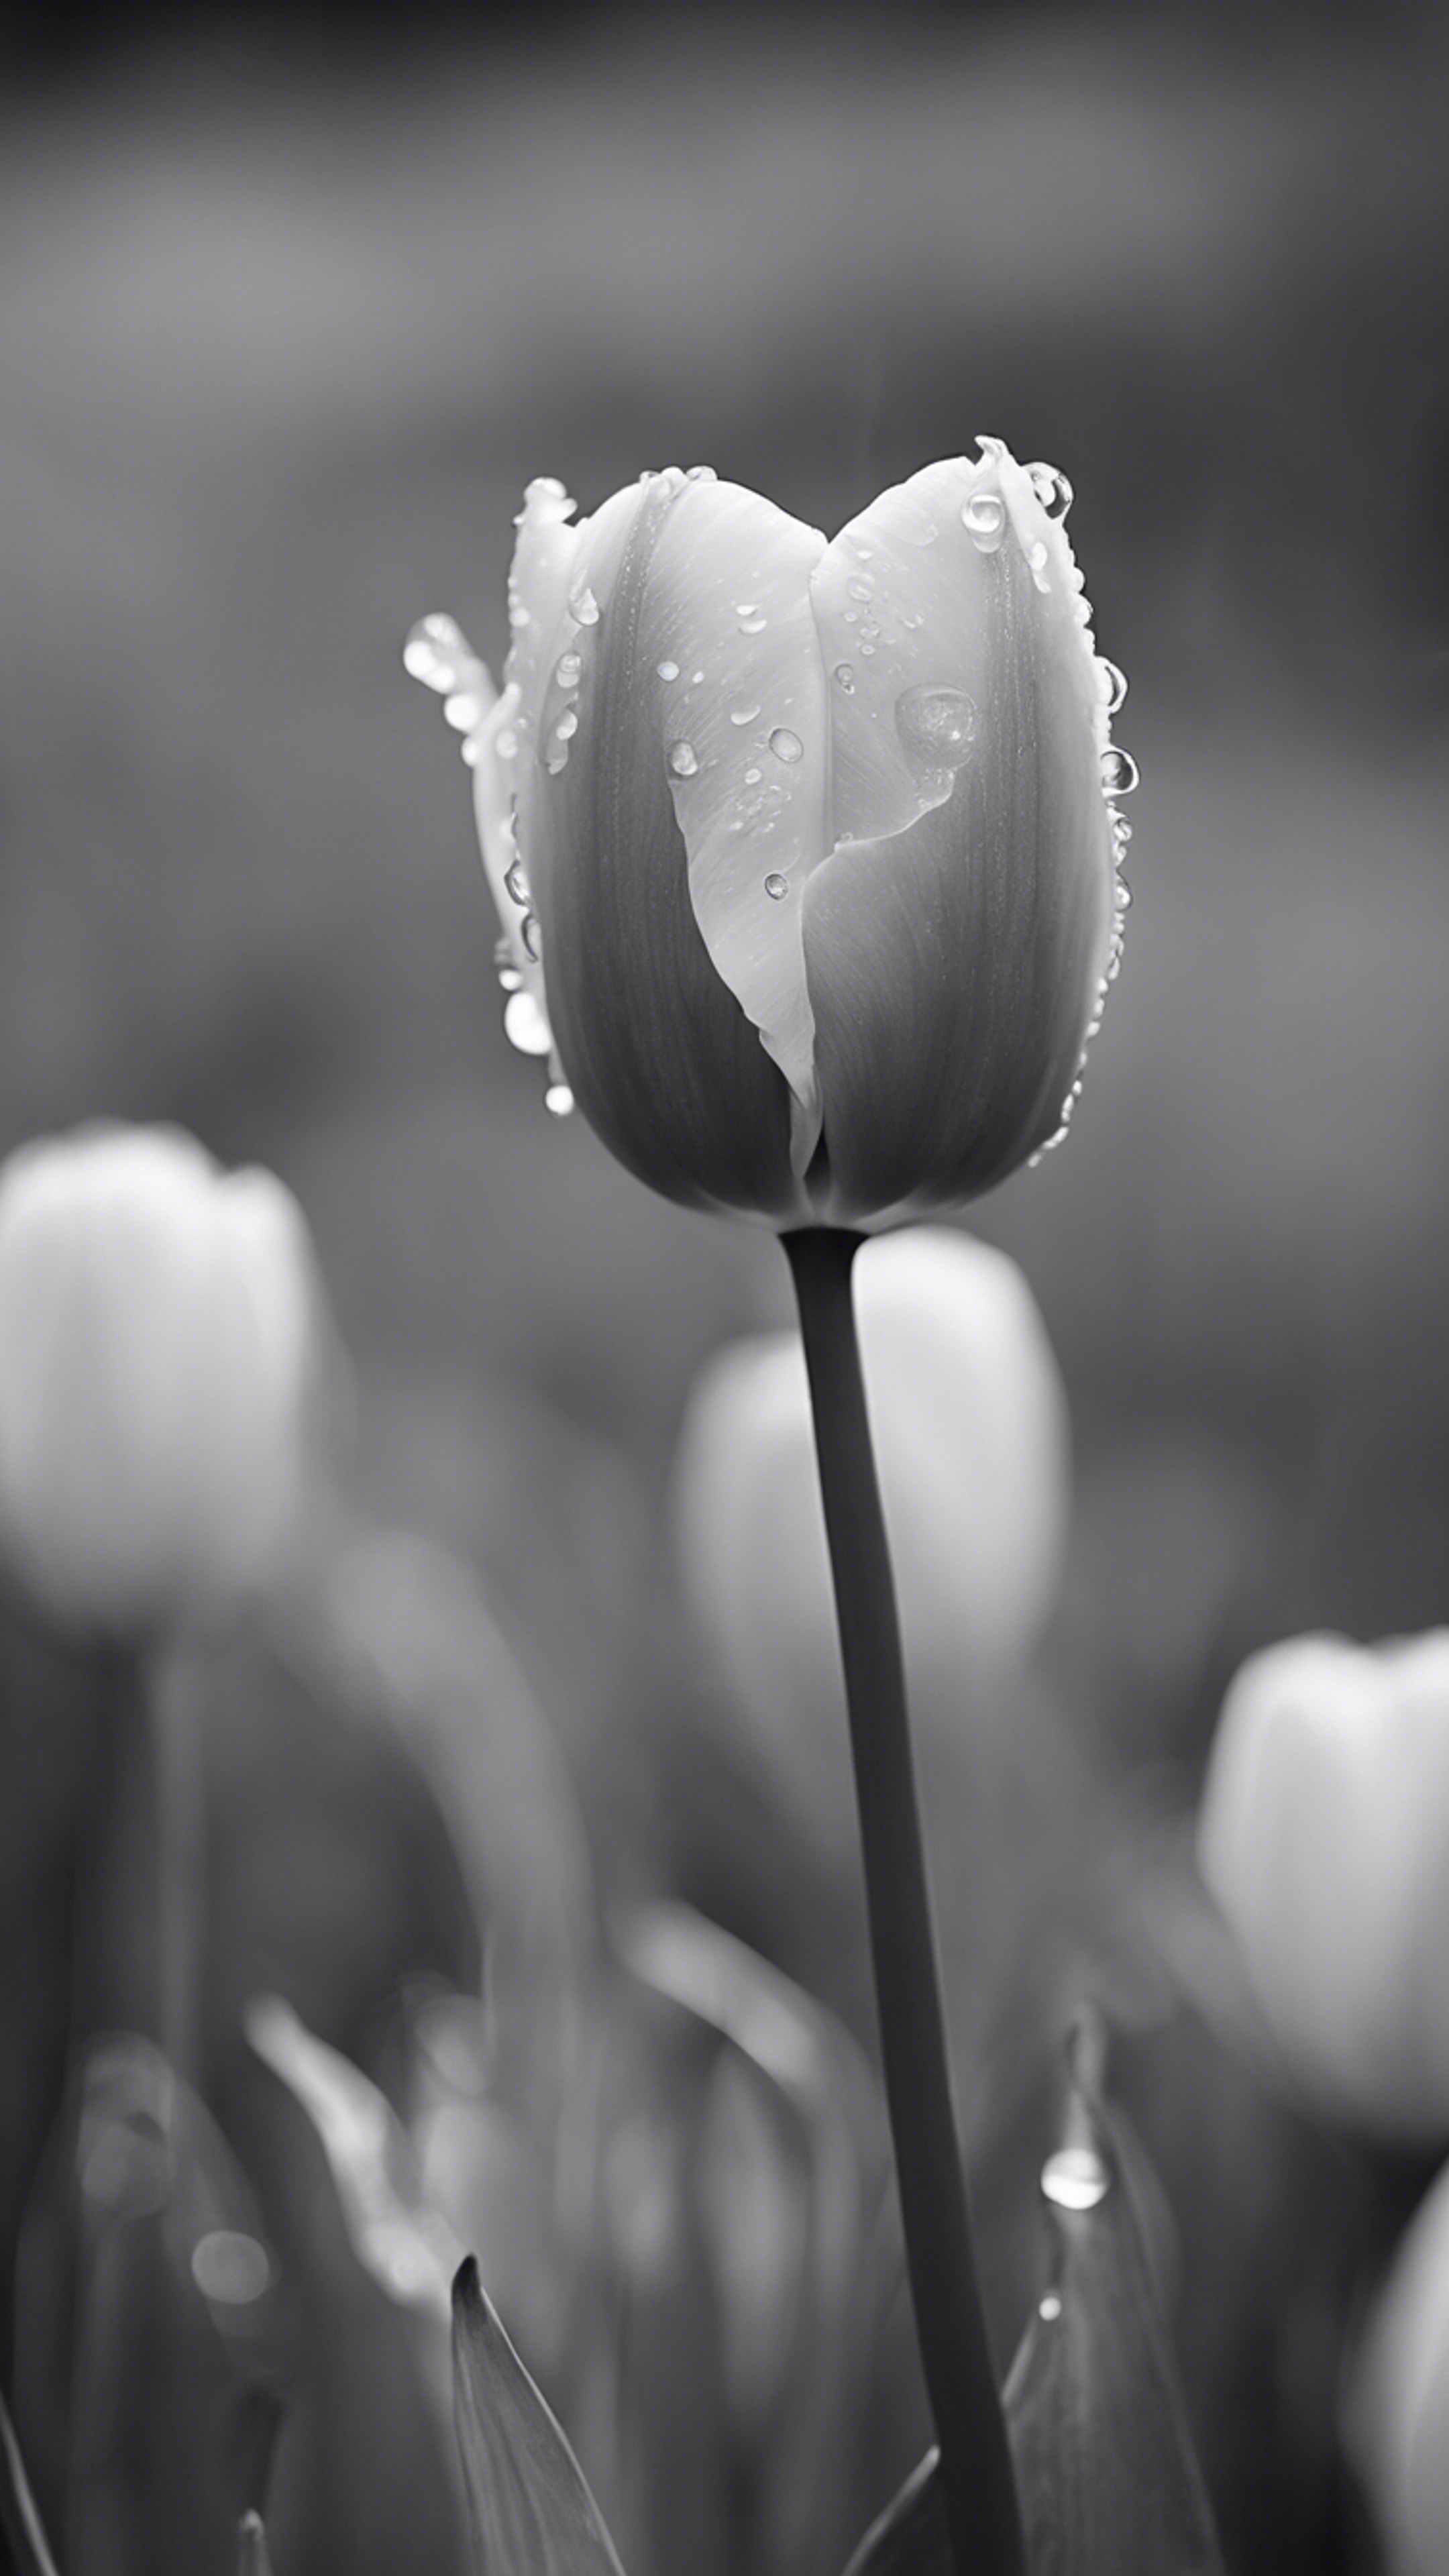 A black-and-white photograph of a tulip in full bloom in the rain. Валлпапер[646ce87a121a4320b6e6]